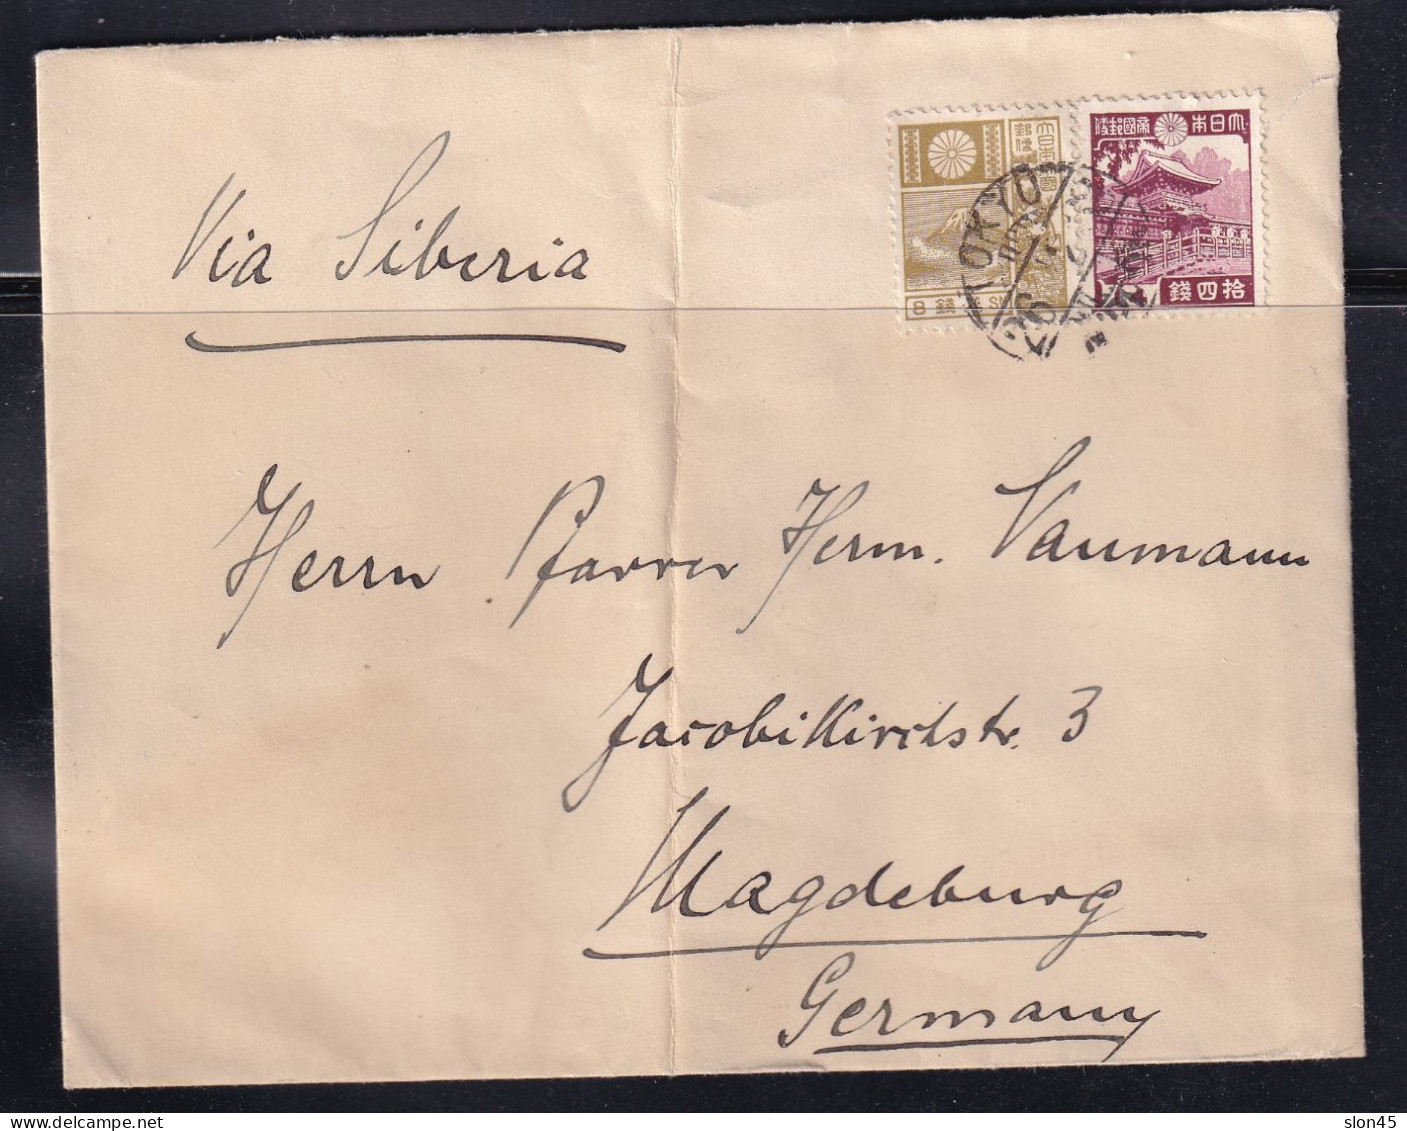 Japan 1933 Cover Tokyo Magdeburg Germany Via Siberia Used 15631 - Covers & Documents